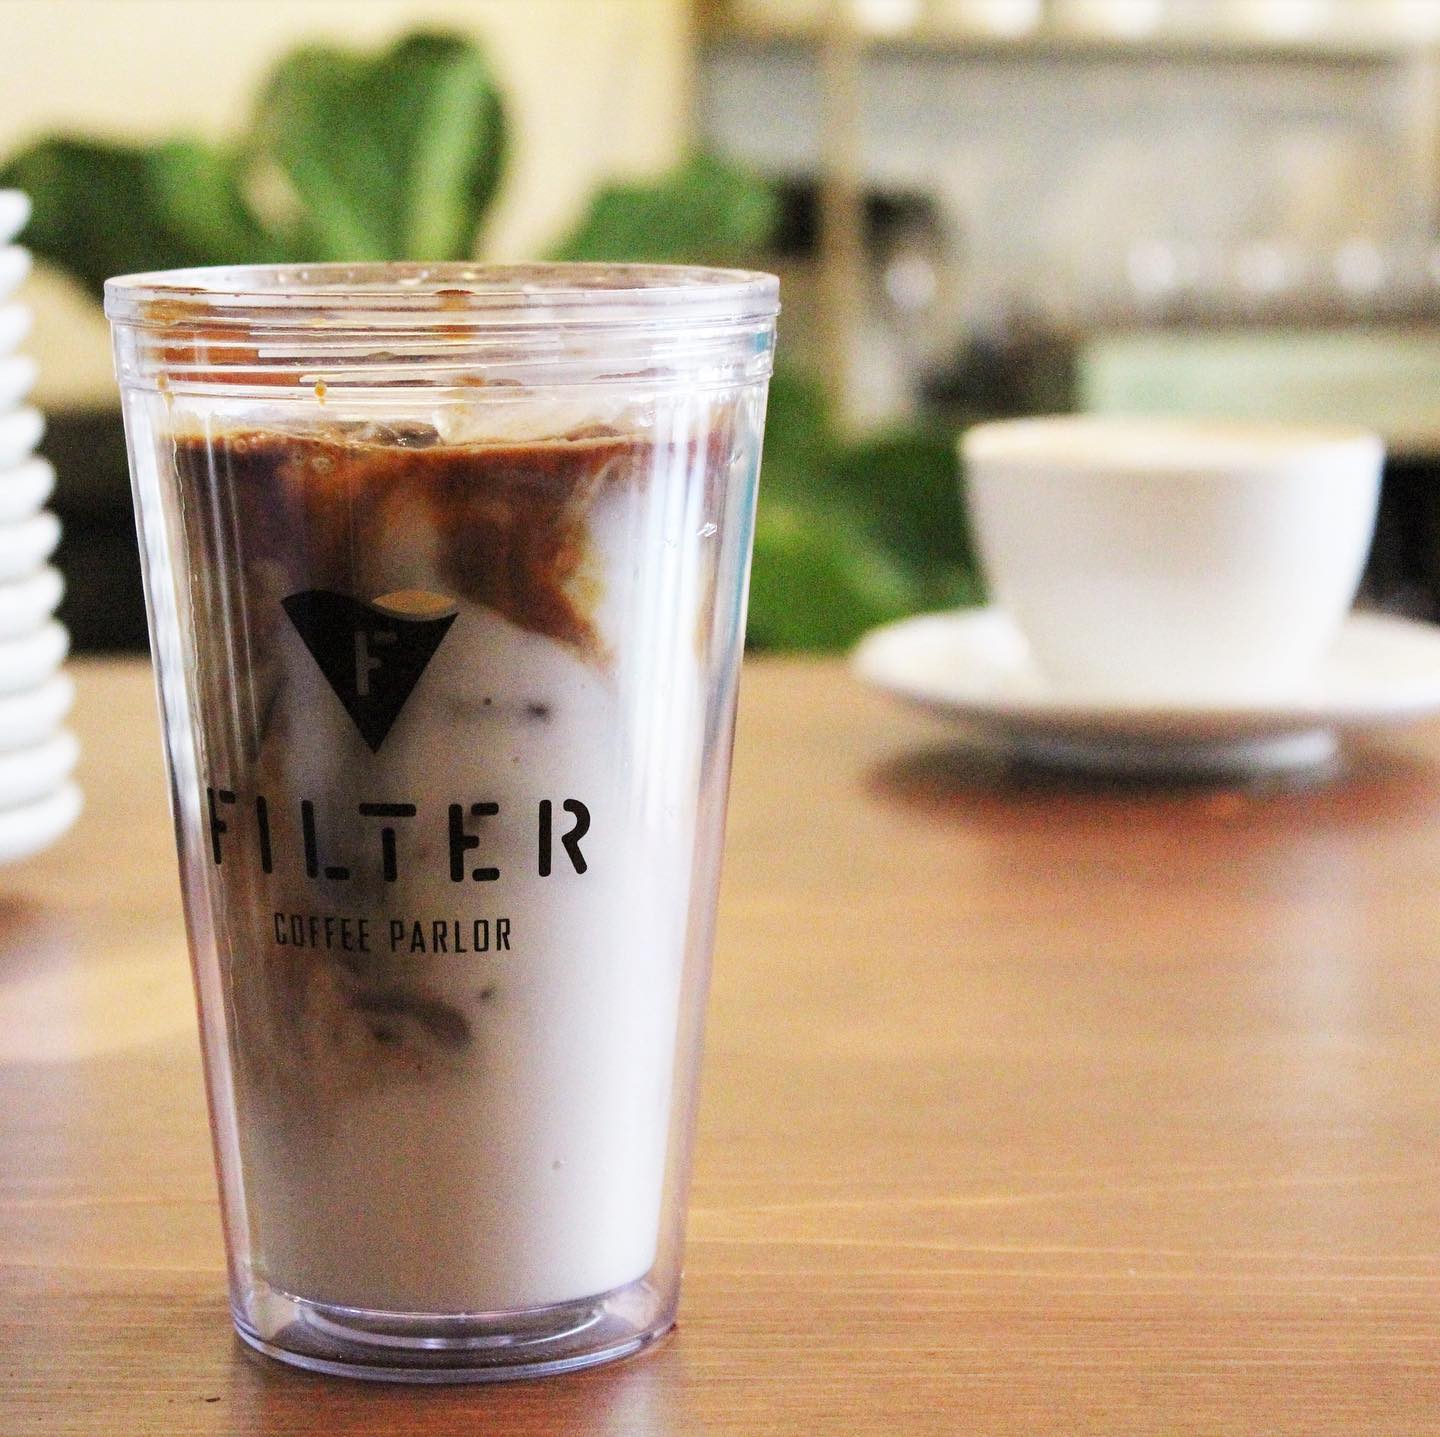 Filter Iced Coffee The early bird's guide to Birmingham—find out what's open before 7AM